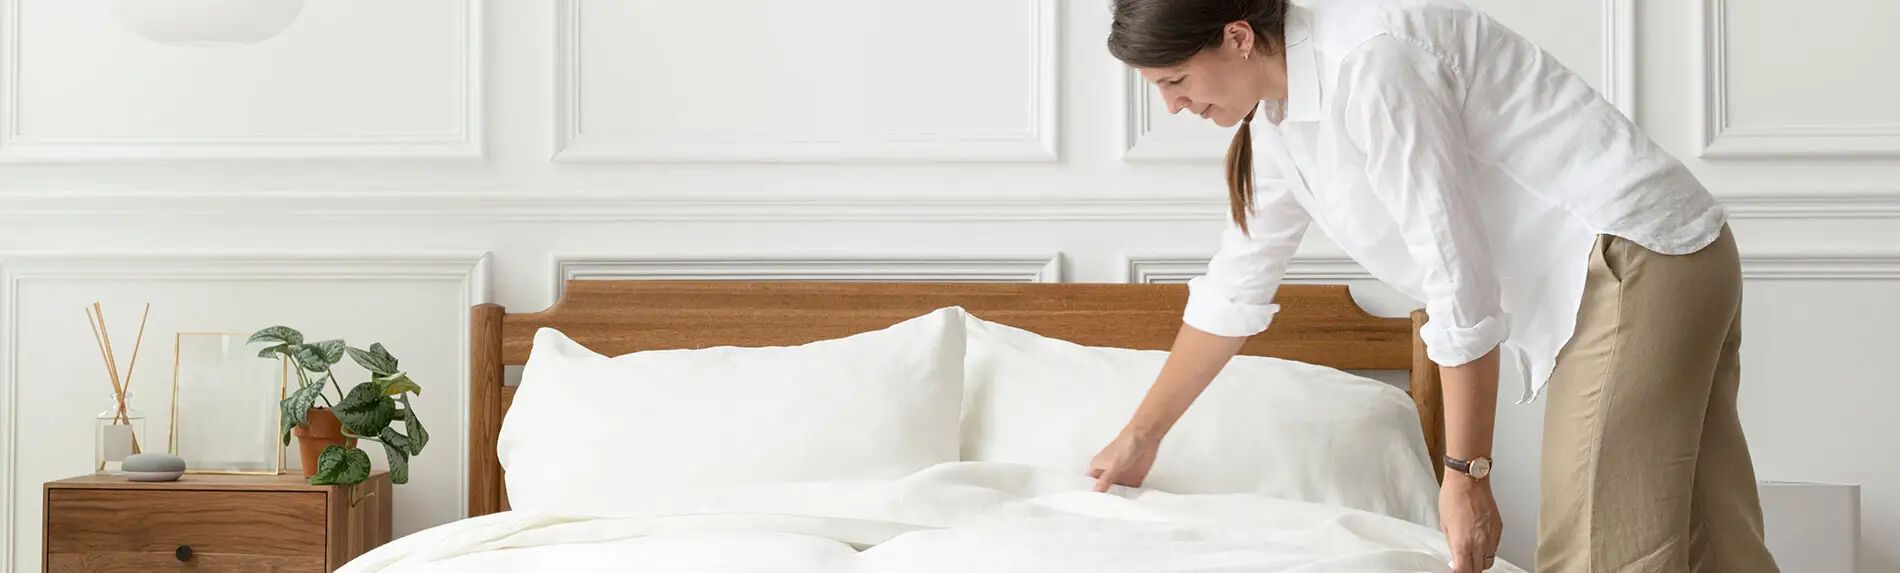 What are Various Pros and Cons of Mattress Toppers?